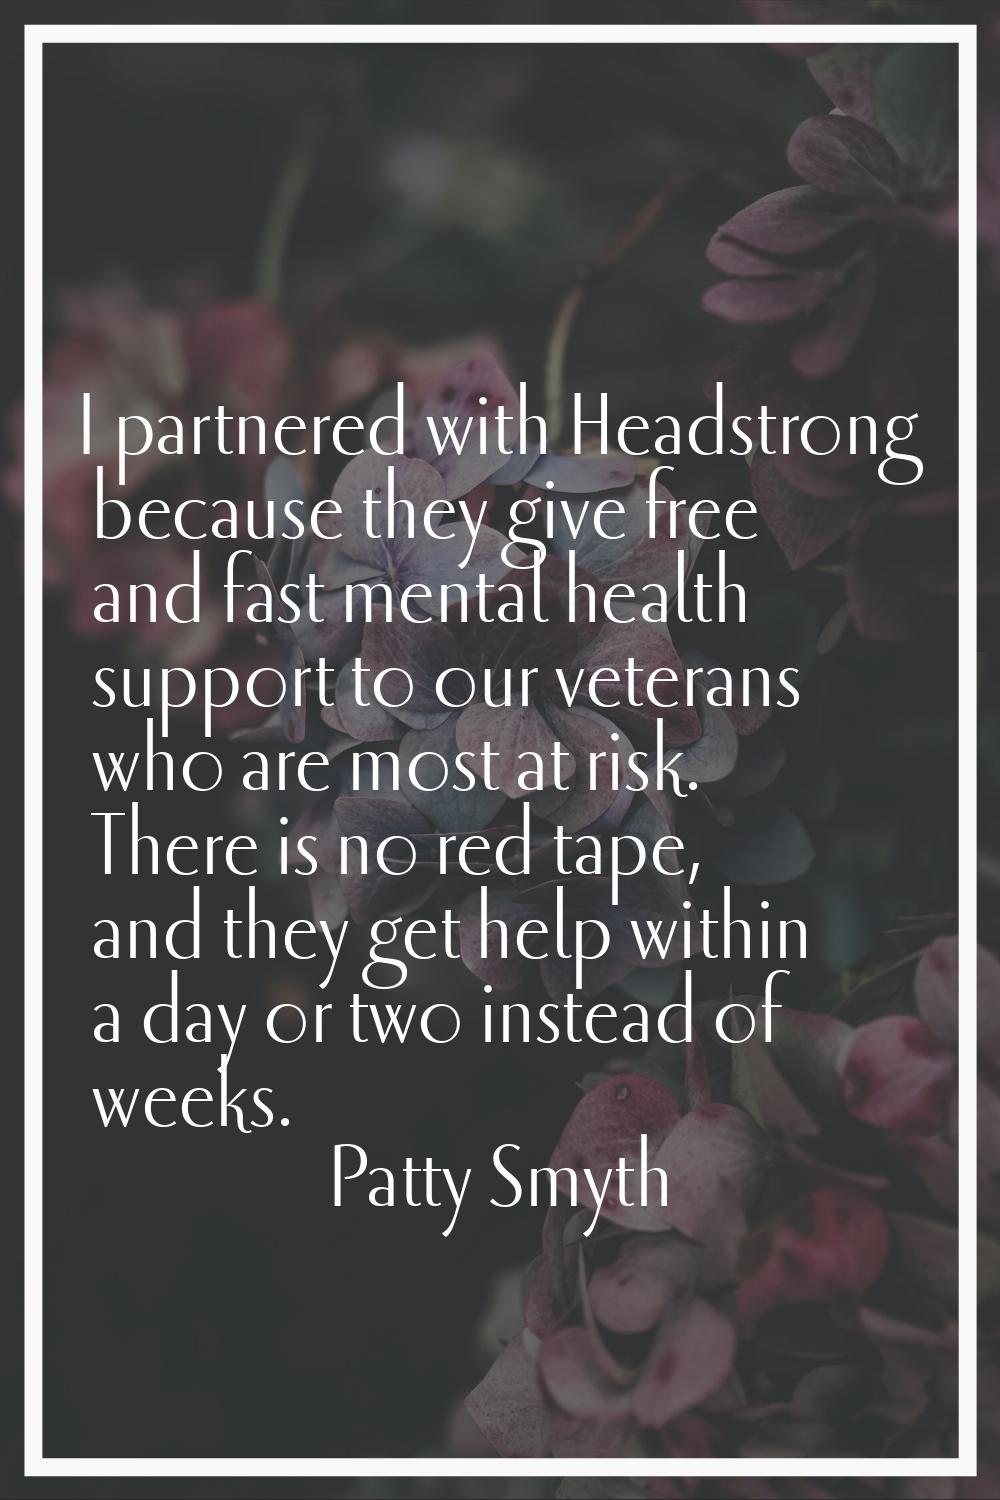 I partnered with Headstrong because they give free and fast mental health support to our veterans w